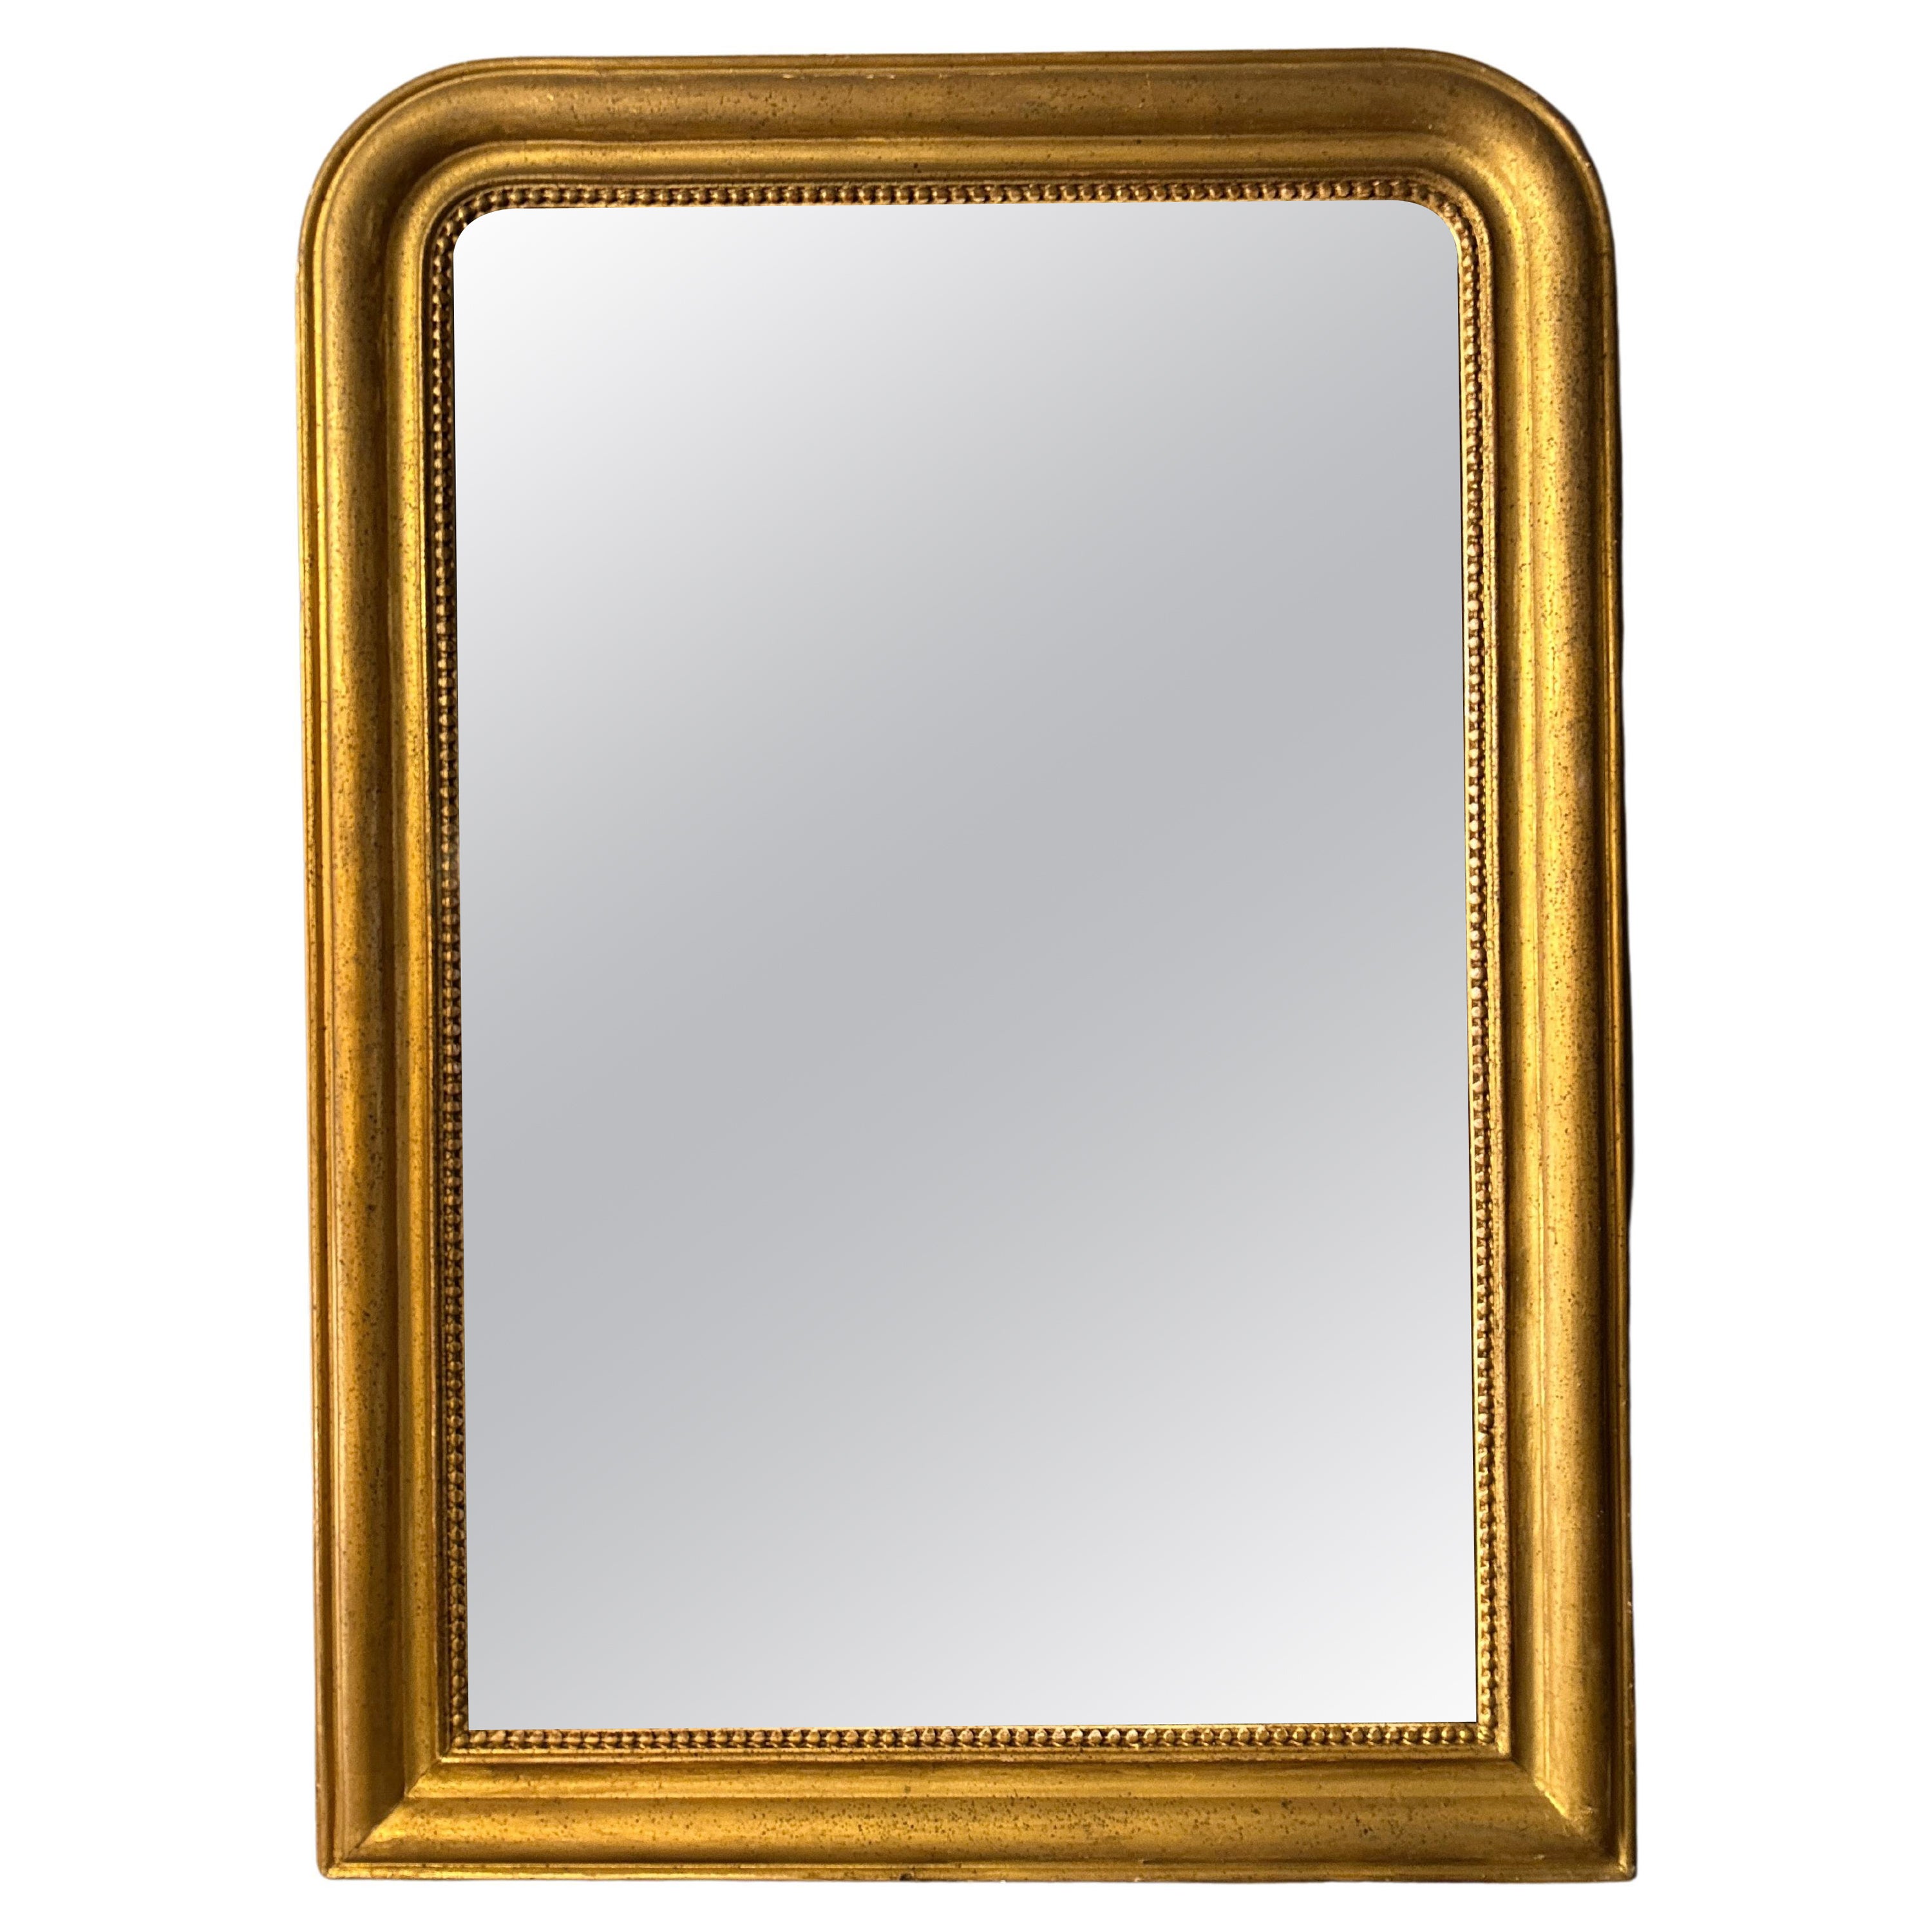 An Antique Gold Gilt Domed Top French Mirror 